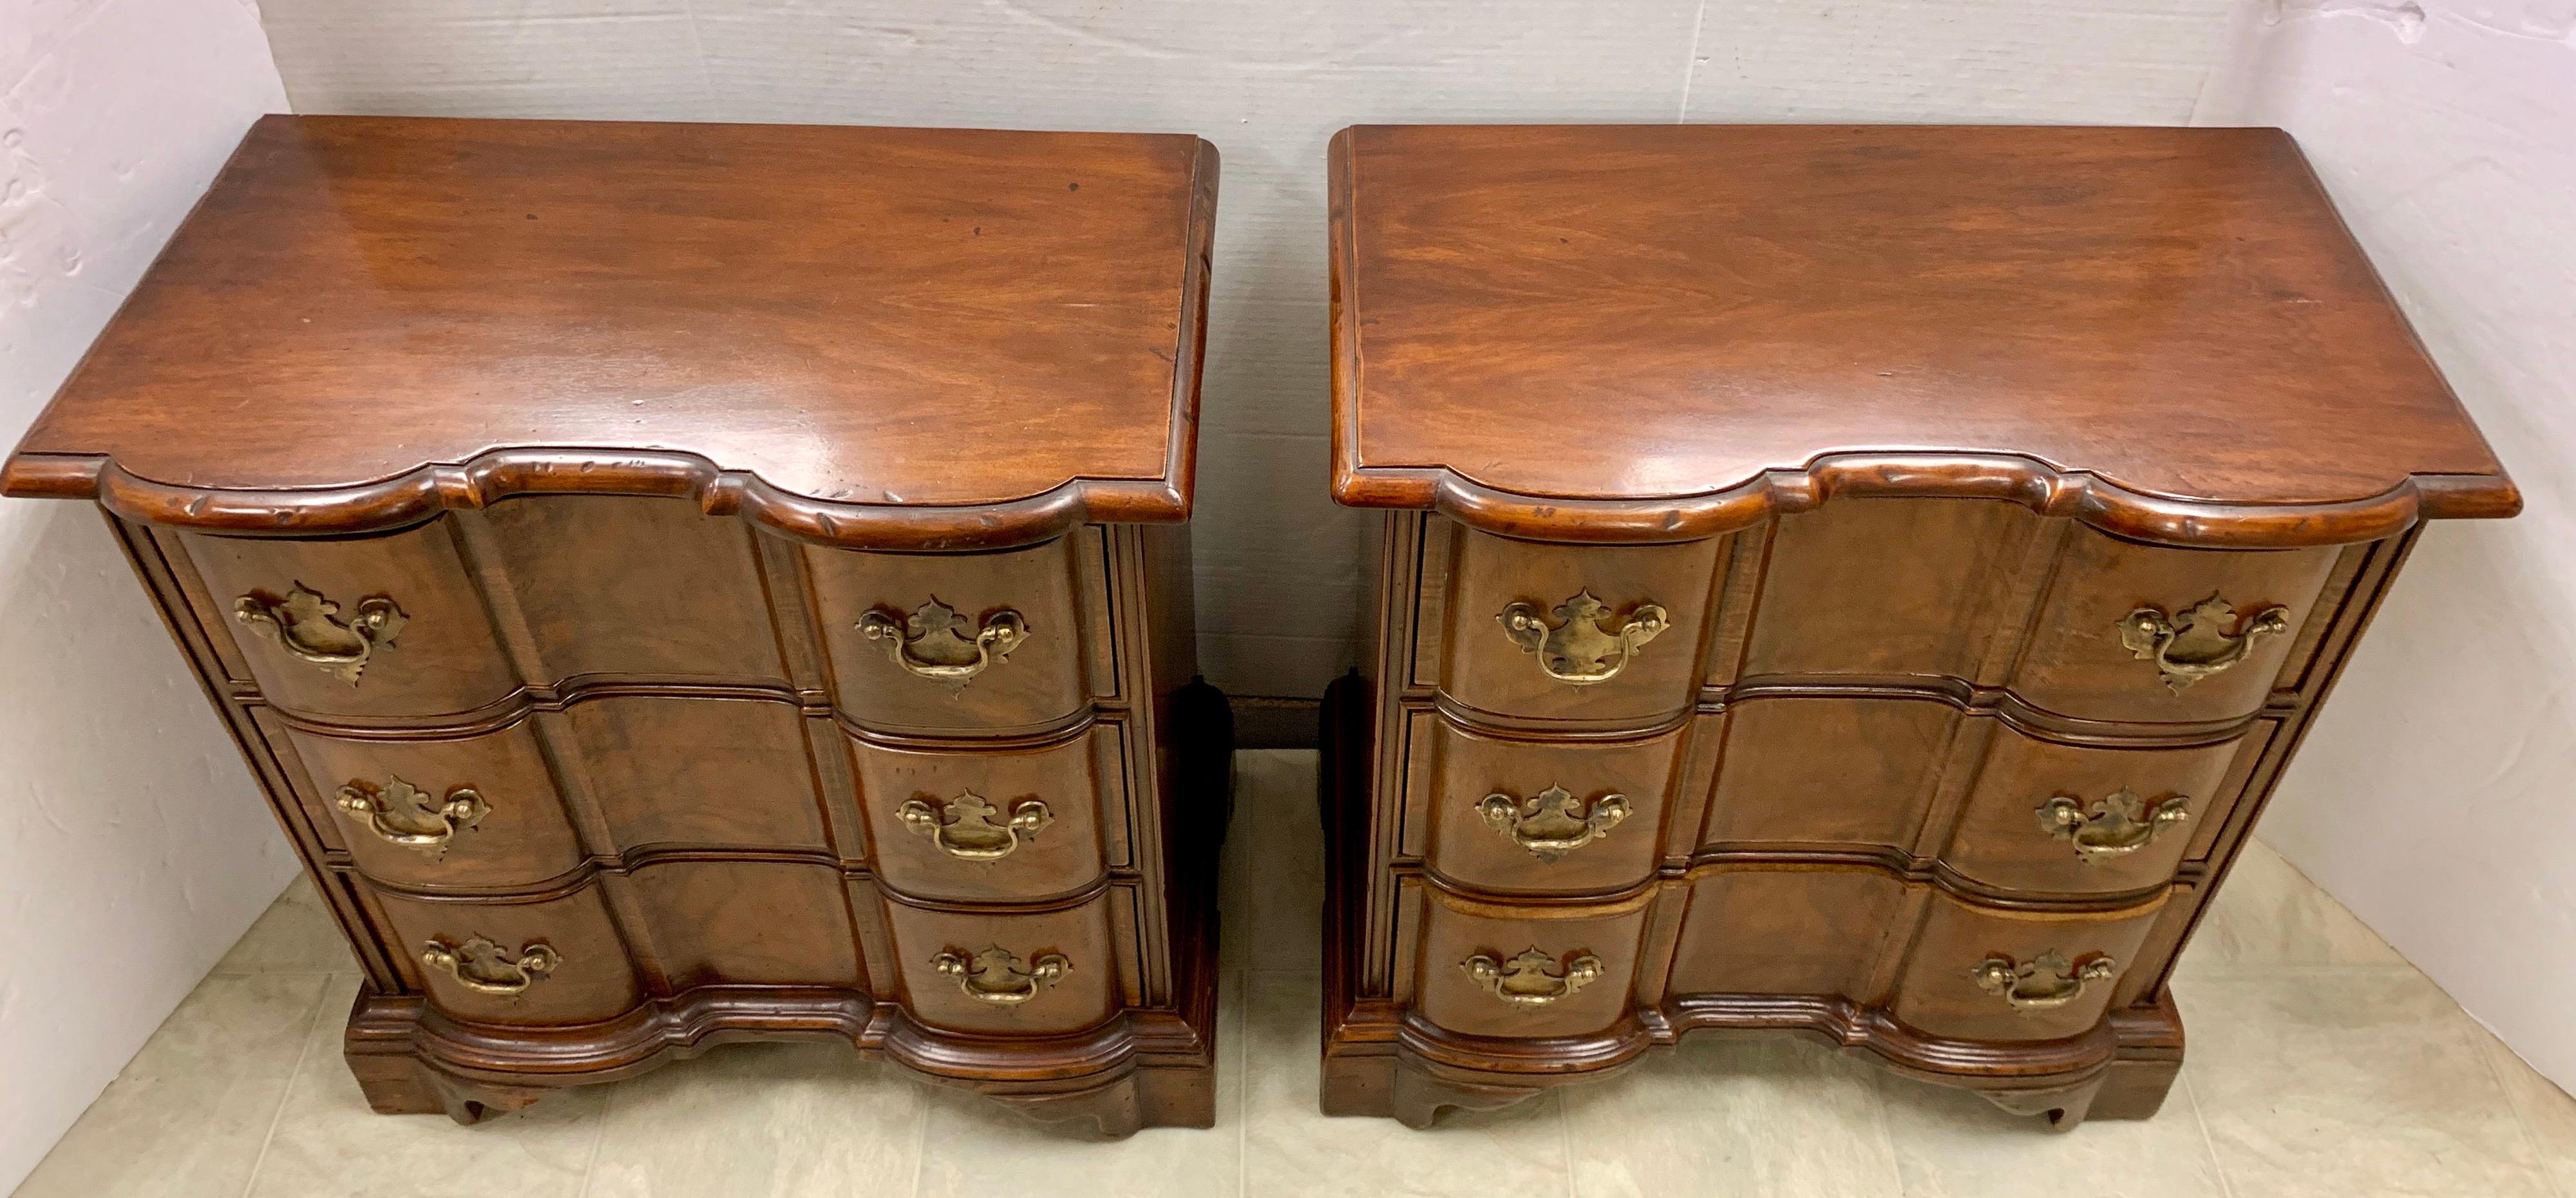 19th Century Pair of Mahogany Block Front Chests Nightstands